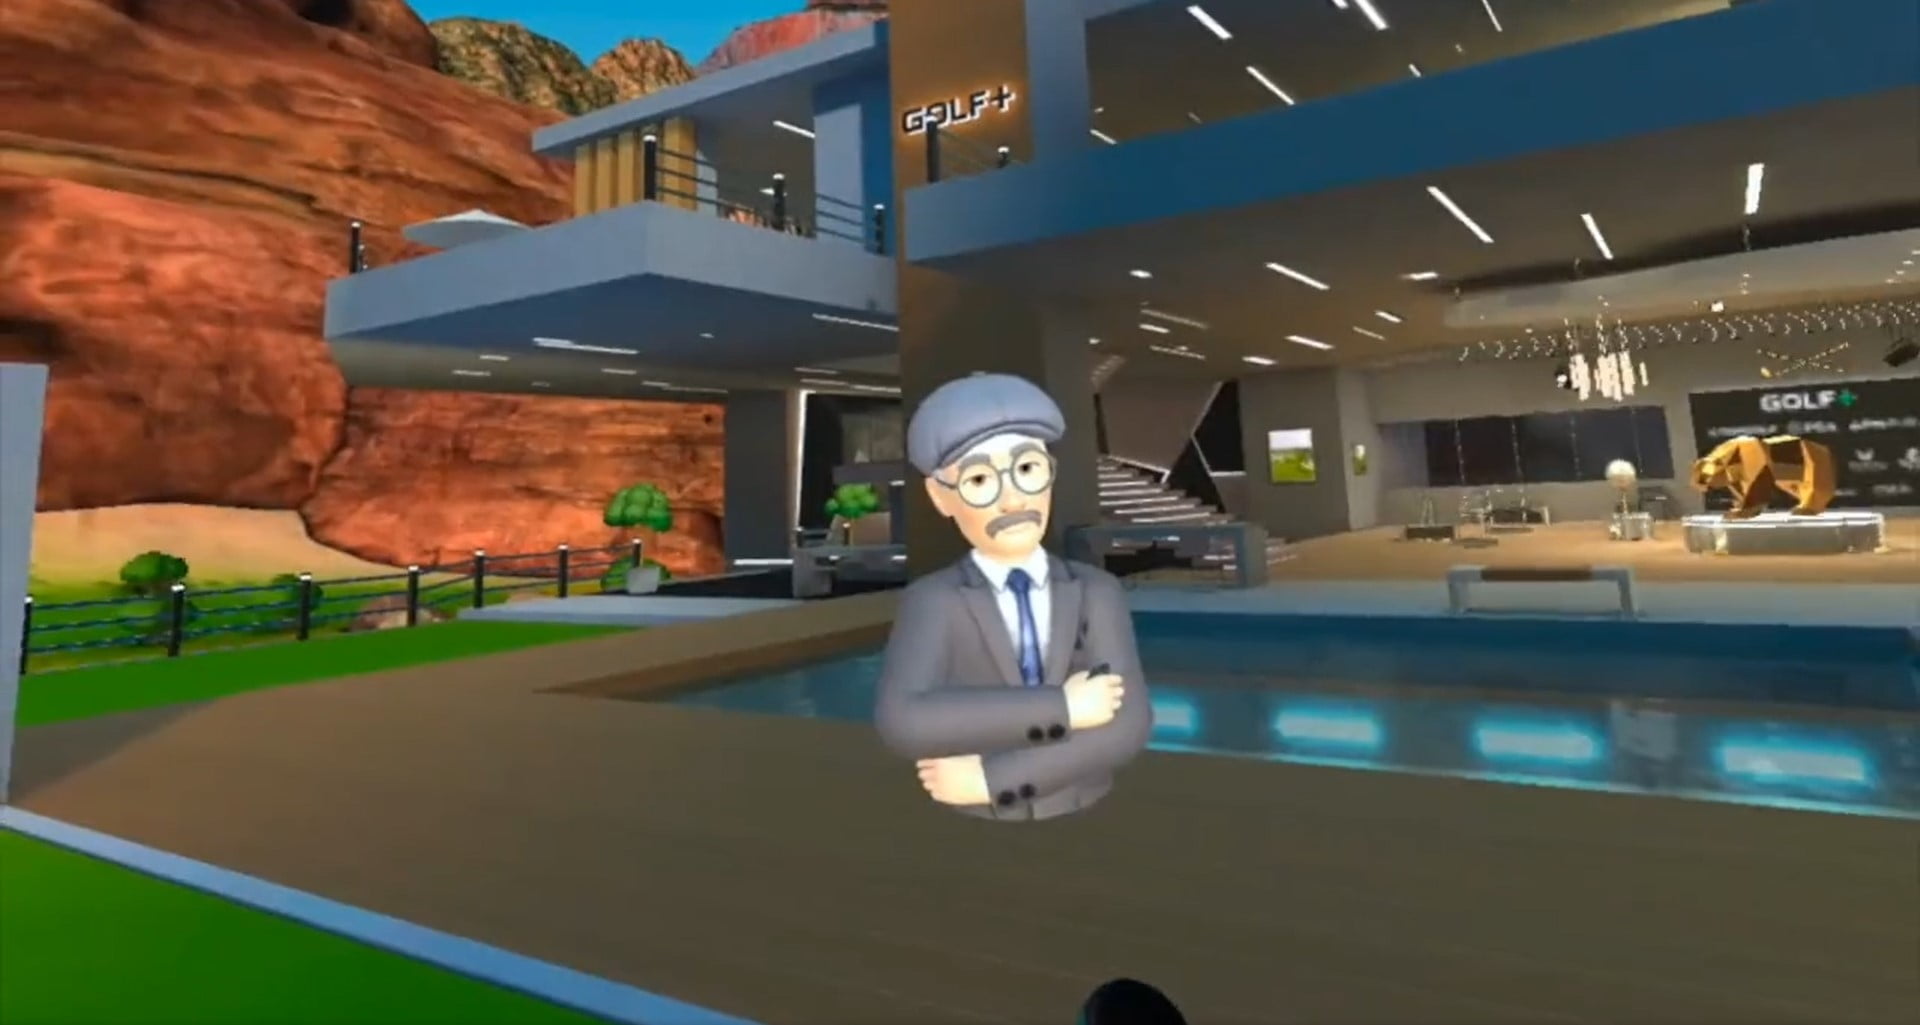 This Caddie talks to you in VR like a real person, thanks to AI